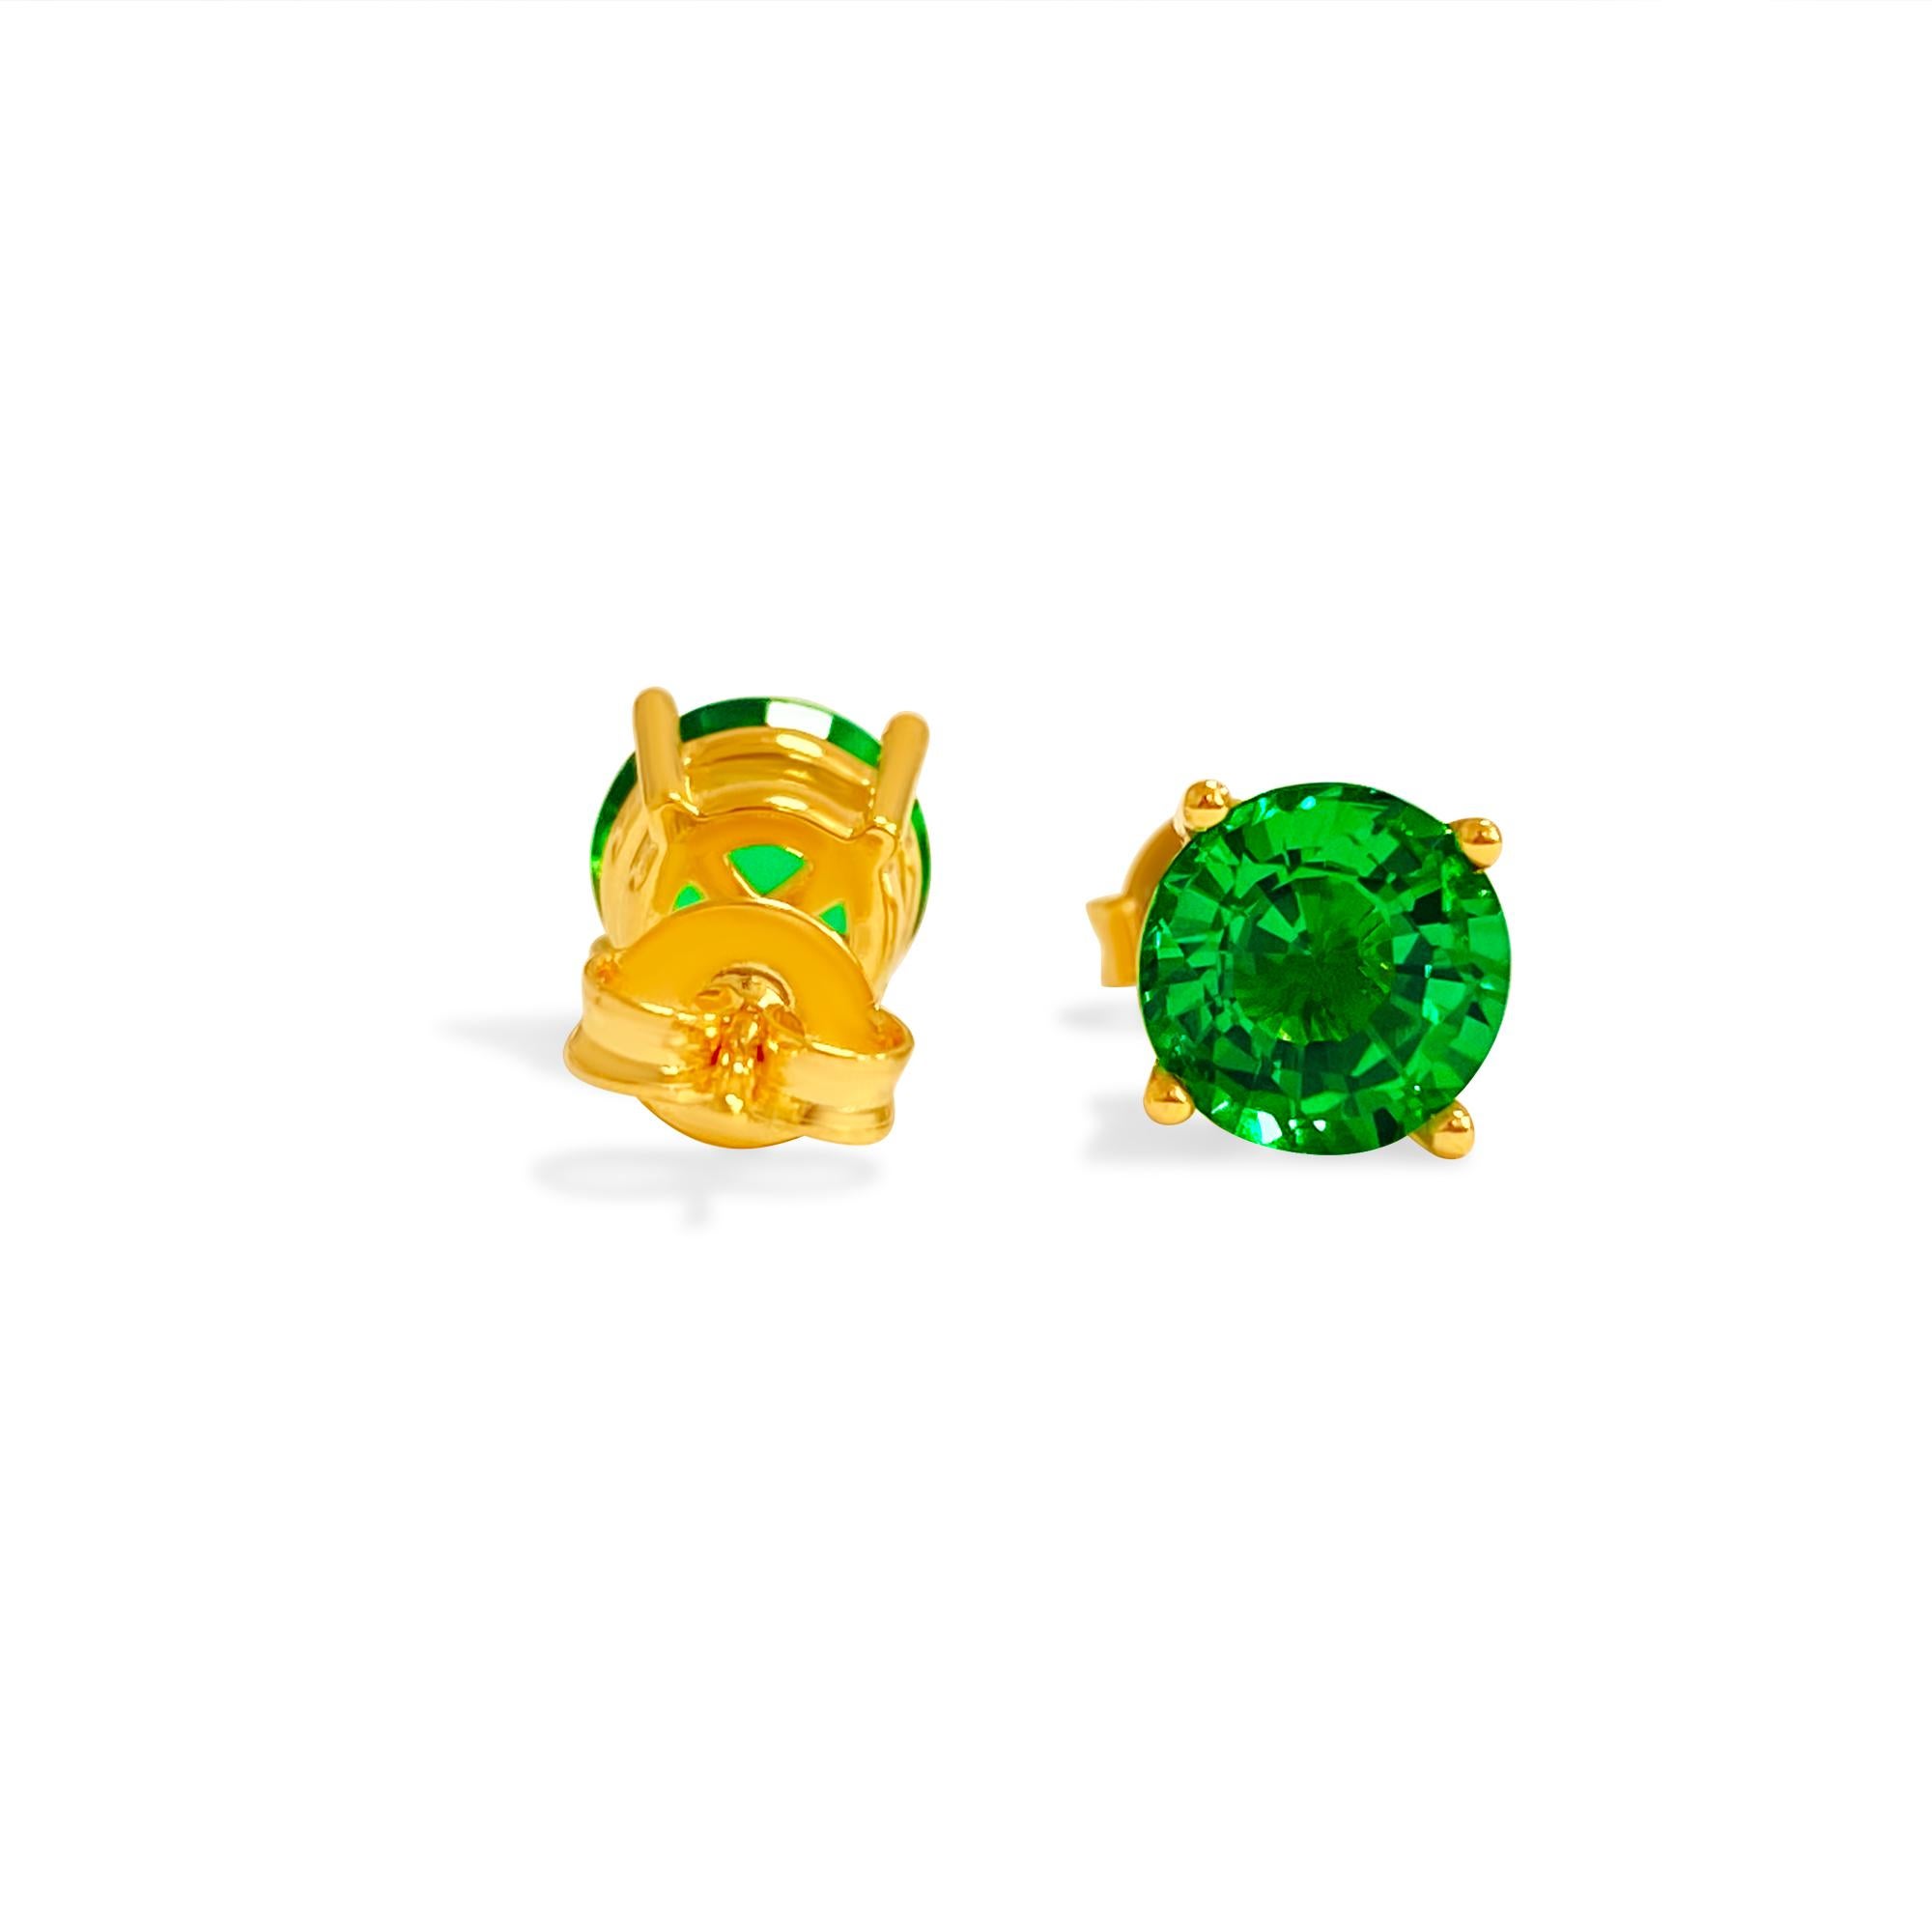 Made in radiant 14K yellow gold, these exquisite stud earrings feature lab-made emeralds with a total carat weight of 4cts, showcasing a flawless round shape and classic four-prong setting for timeless elegance. Each emerald boasts a gorgeous even